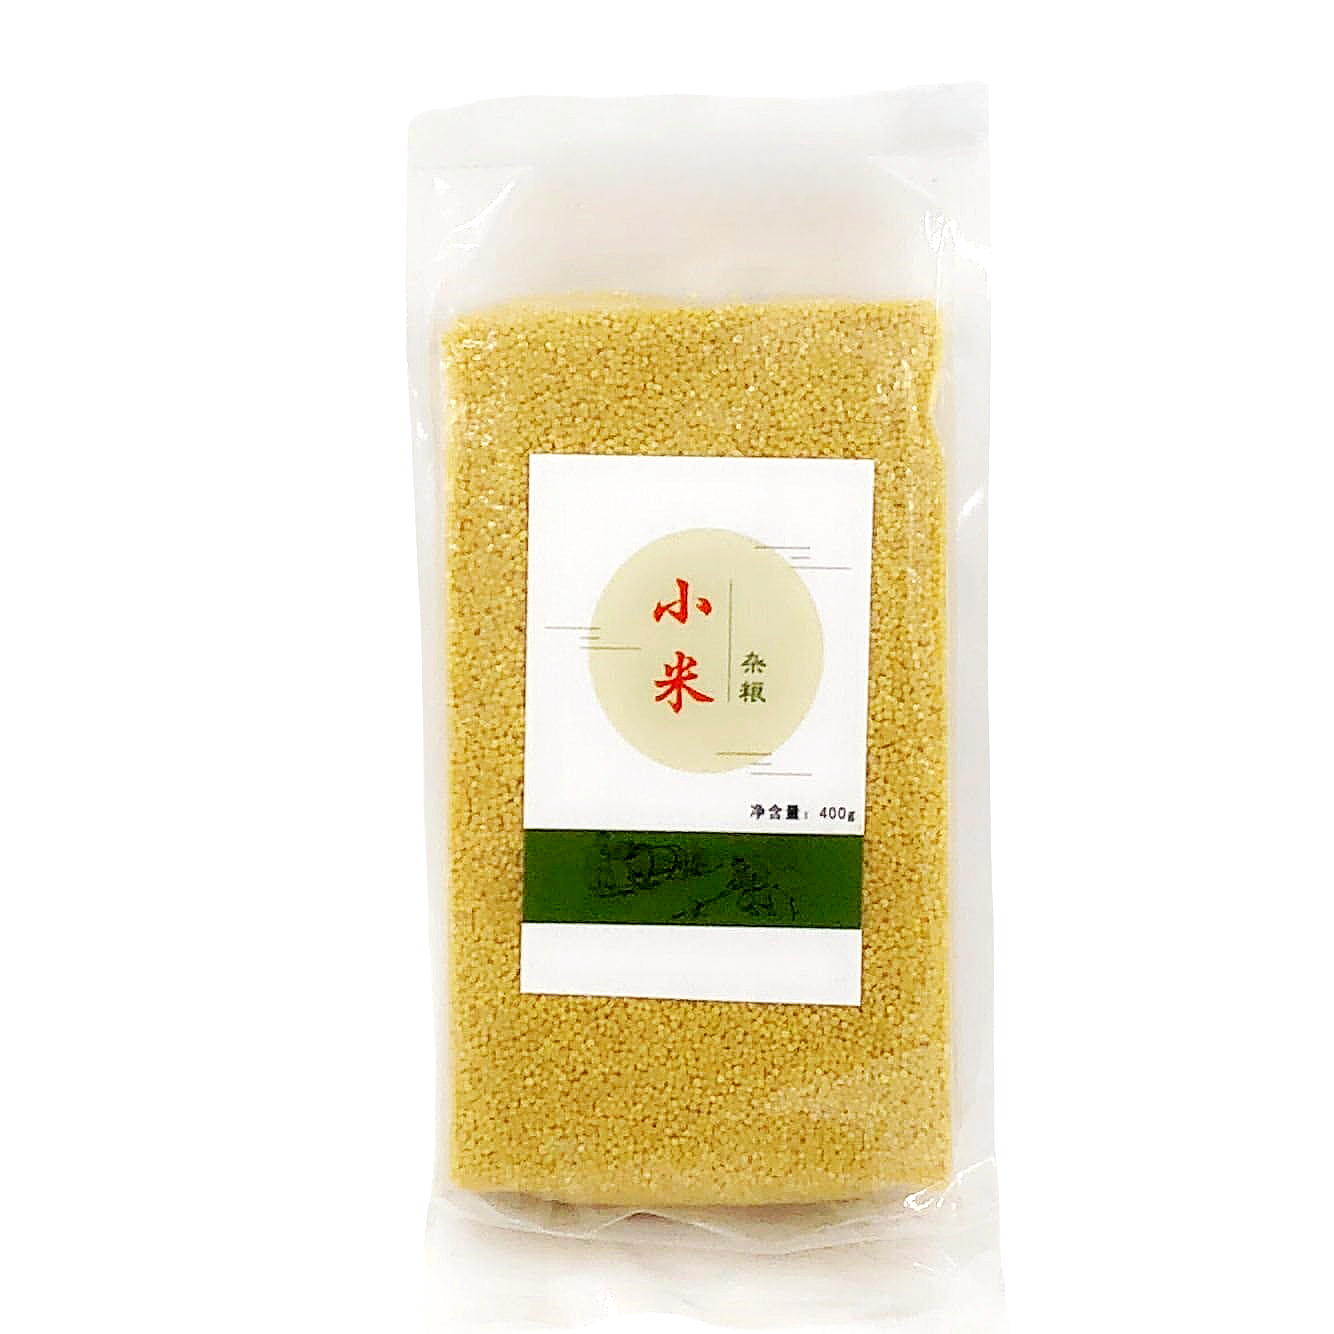  yellow small rice (awa.).. yellow rice small rice China special selection agriculture work thing . thing natural green color food health nutrition food ingredients Chinese .. popular commodity 400g